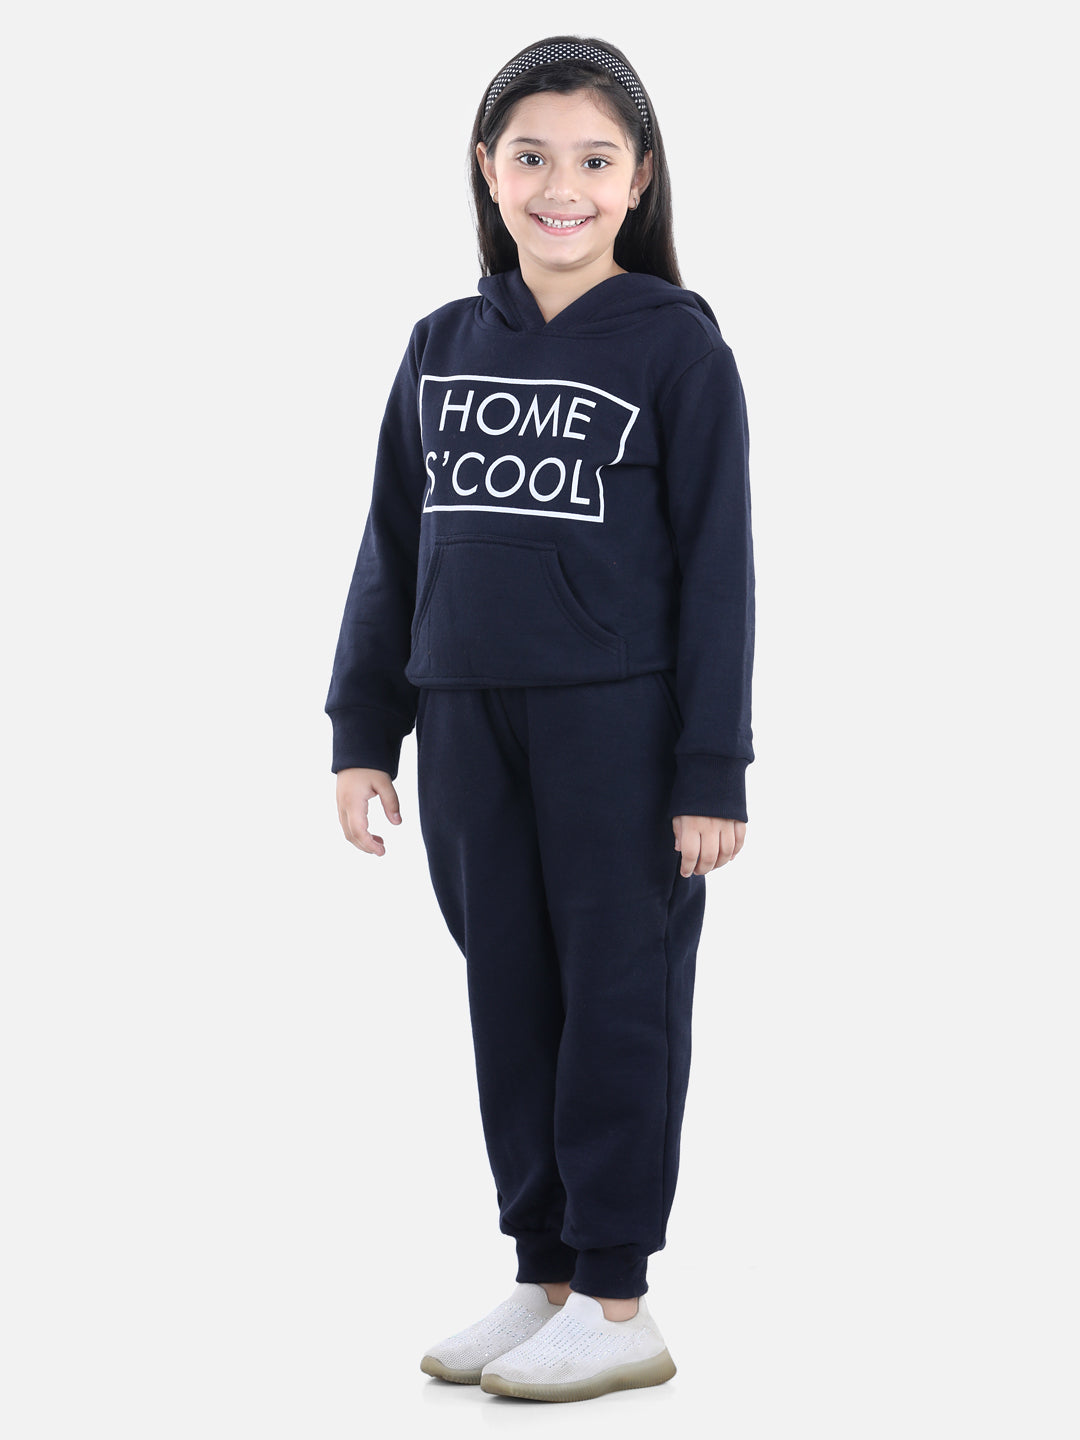 Girls Navy Home S'Cool Printed Hooded Track Suit Set